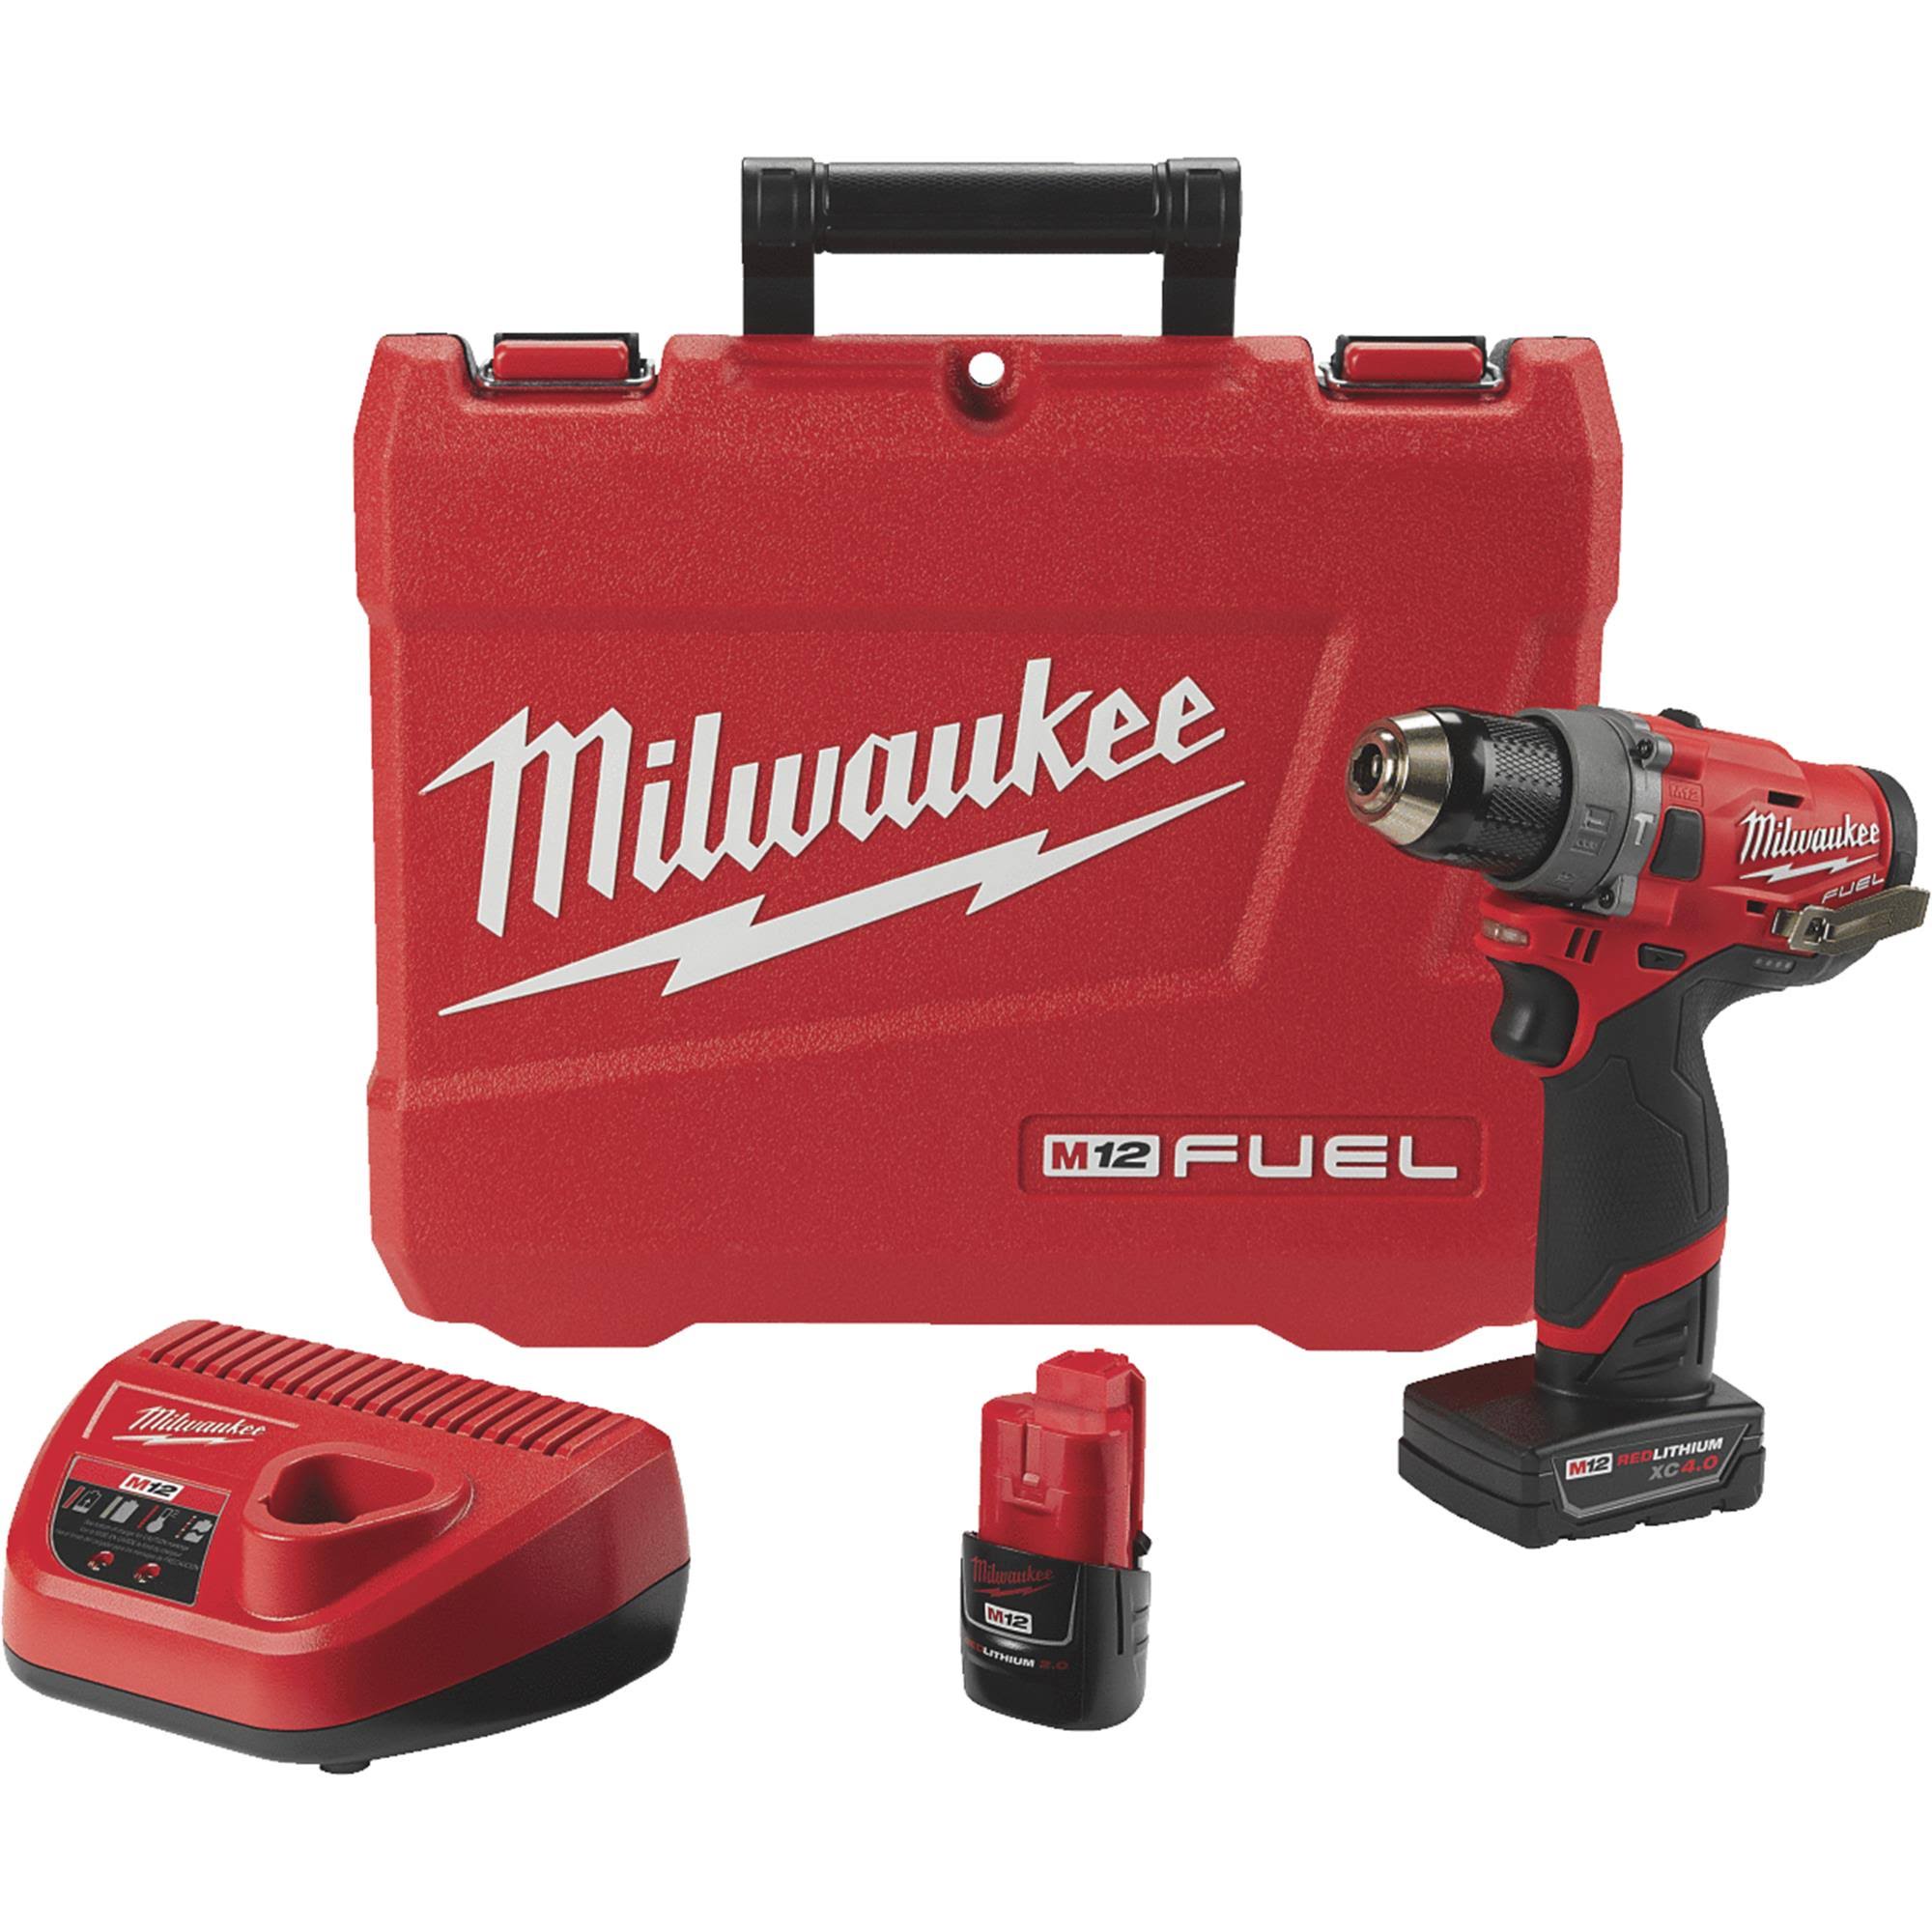 Milwaukee 2504-22 M12 Fuel Lithium Ion Hammer Drill Kit - with 4.0ah and 2.0ah Battery and Hard Case